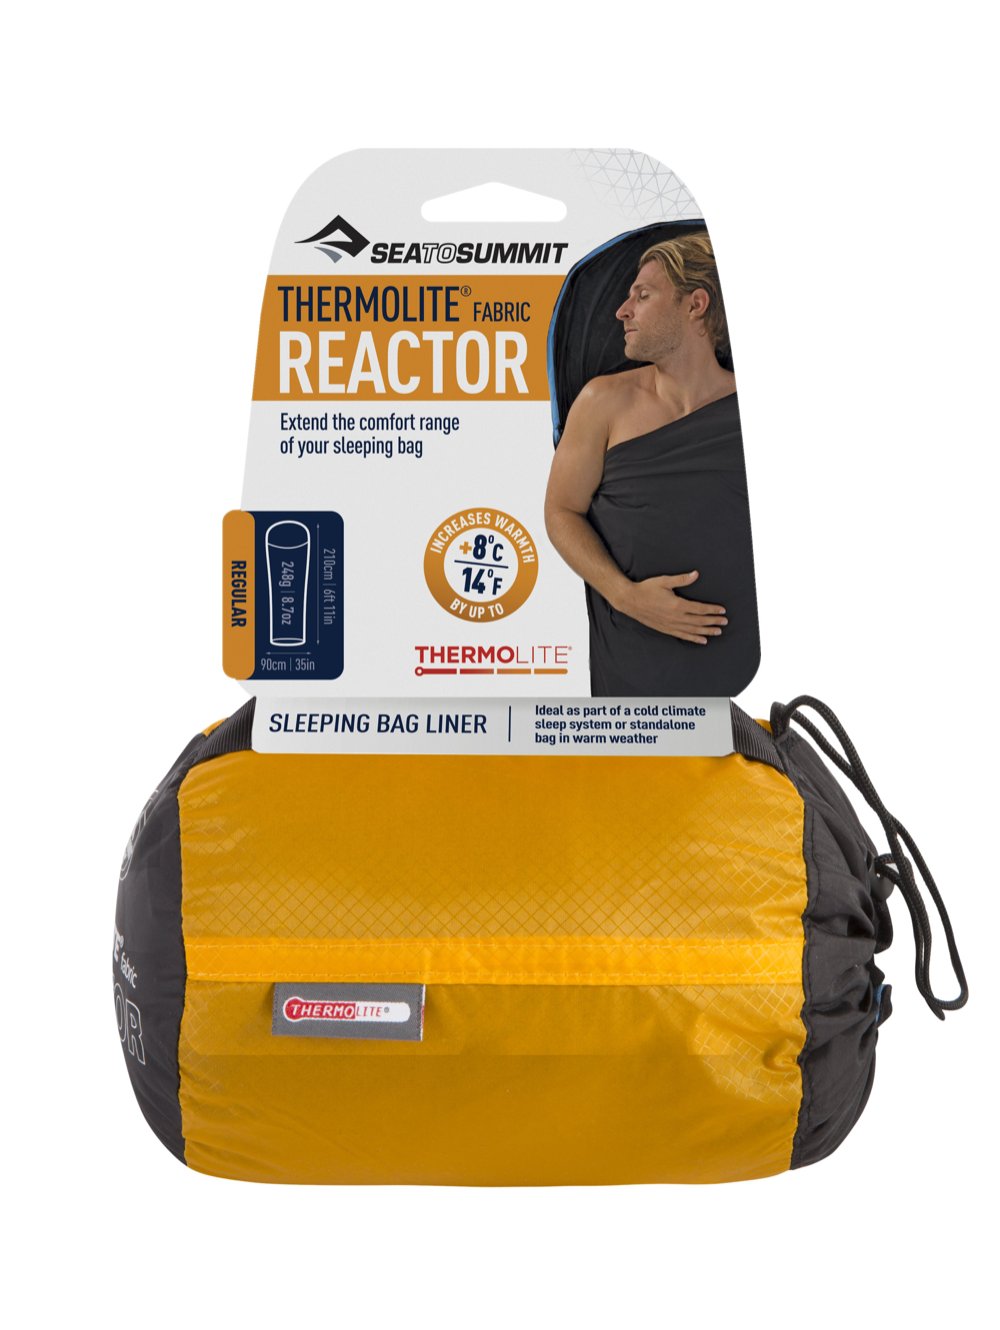 Sea to Summit Thermolite reactor liner with packaging